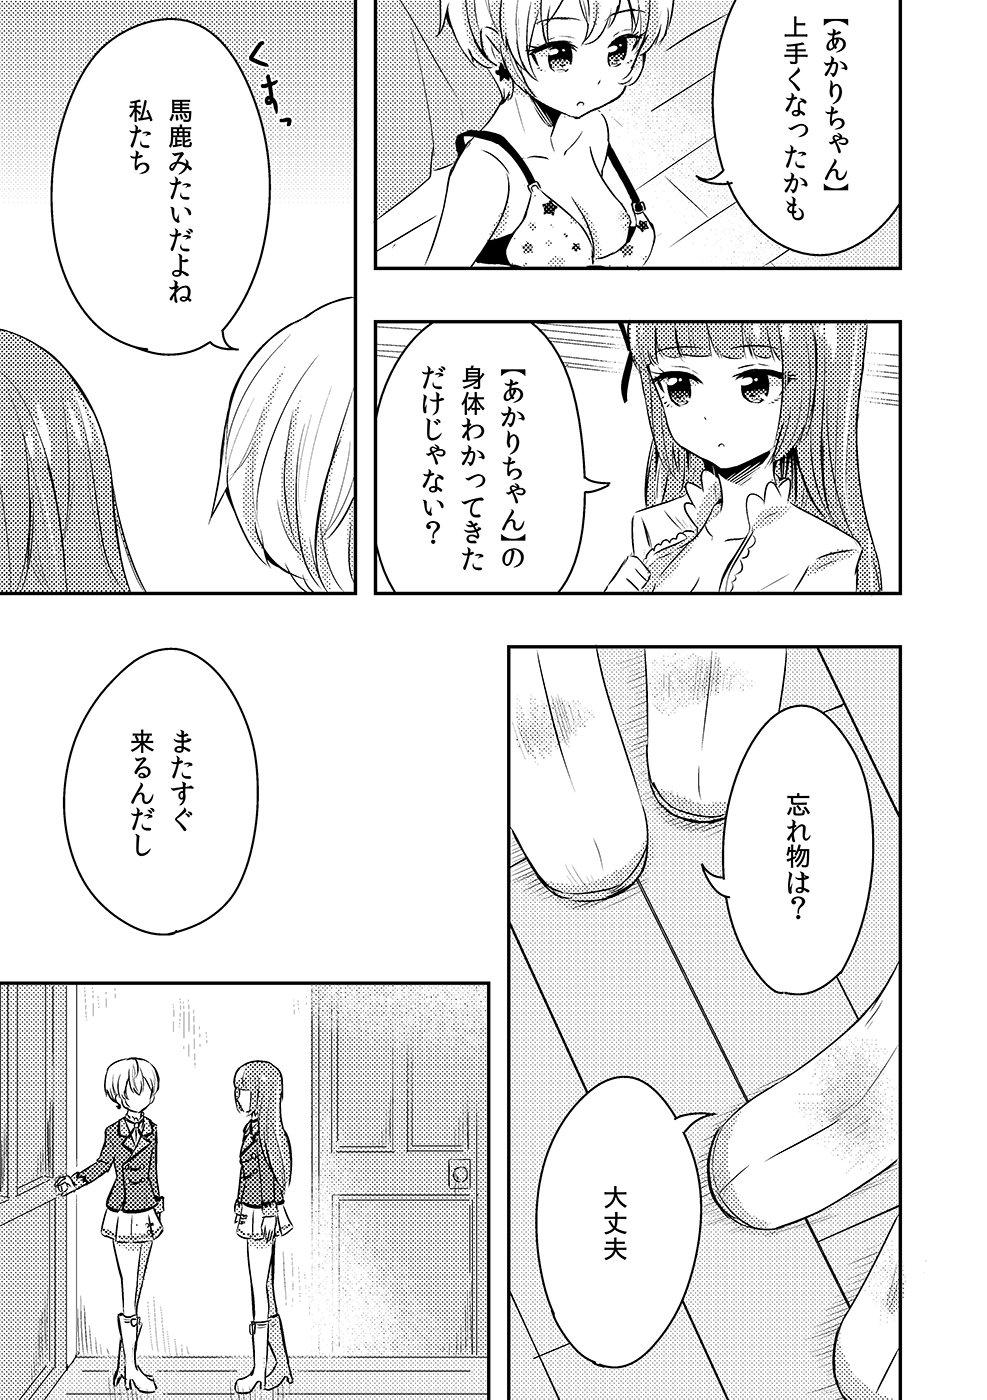 Who contributed to loveless sex joint two years ago! Yuusumi manga. 5